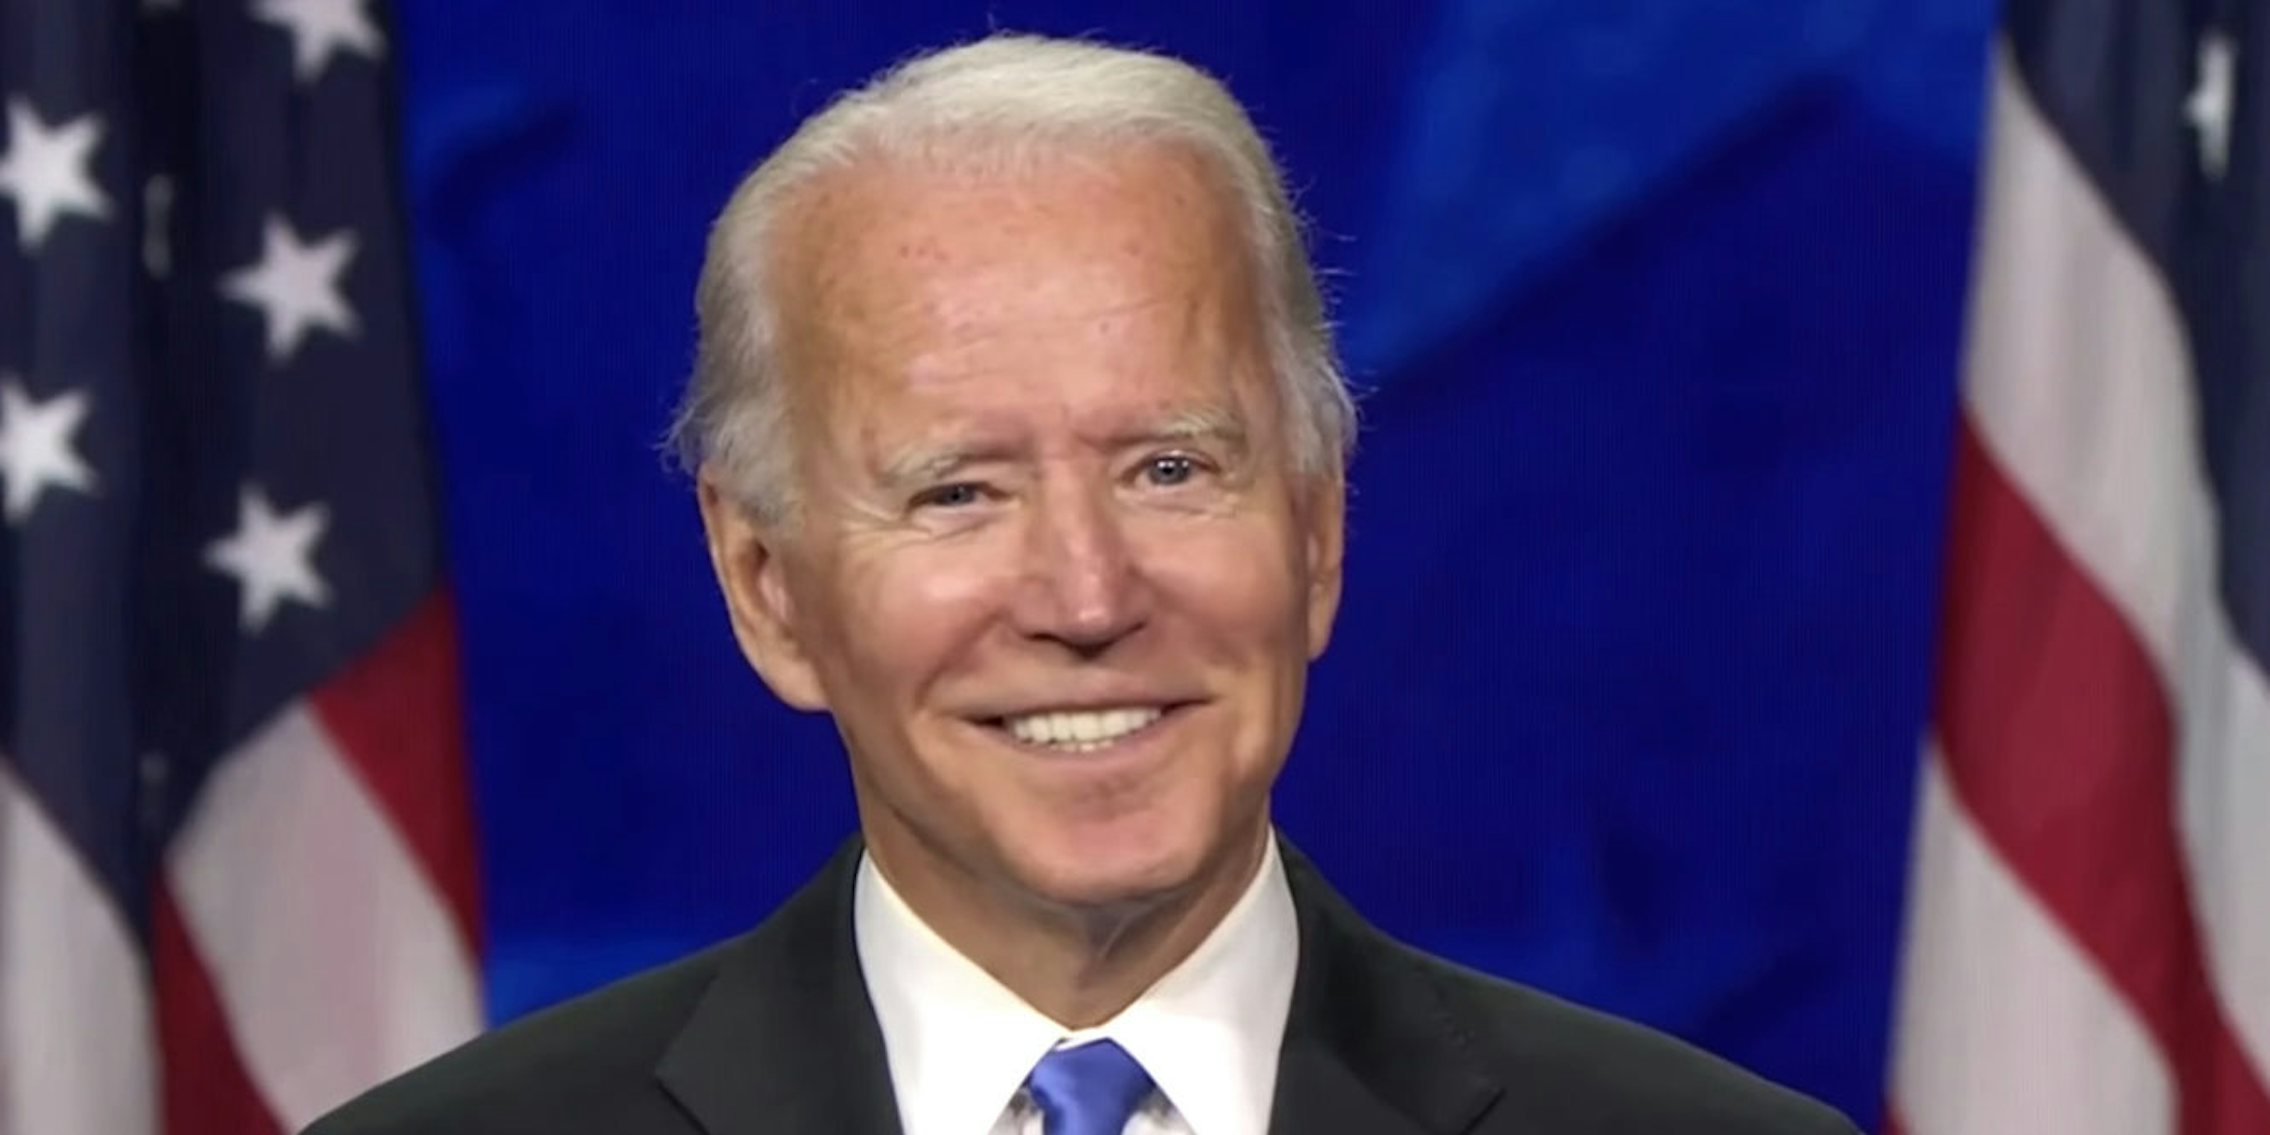 The Biden campaign joined forces with a 15-year-old Instagram activist